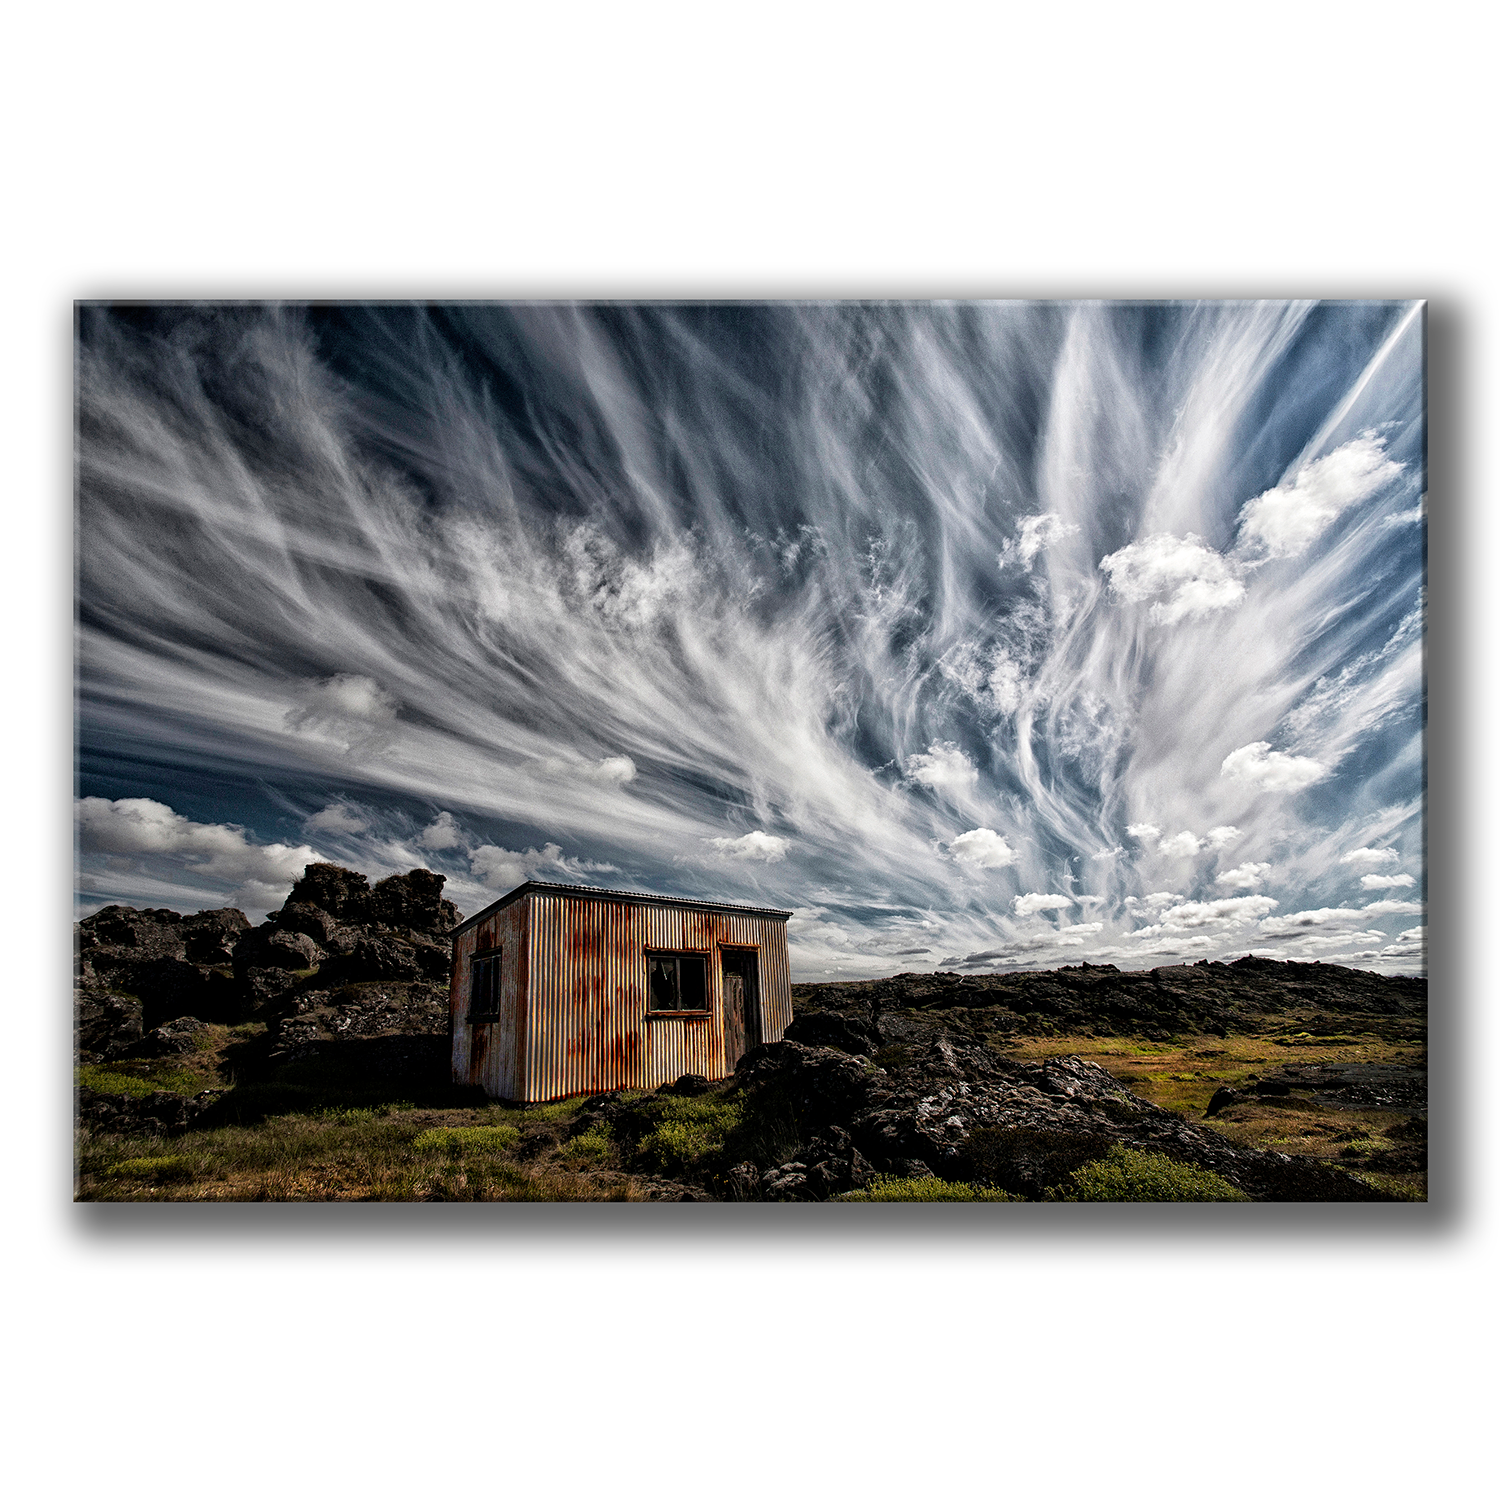 clouds over a shack